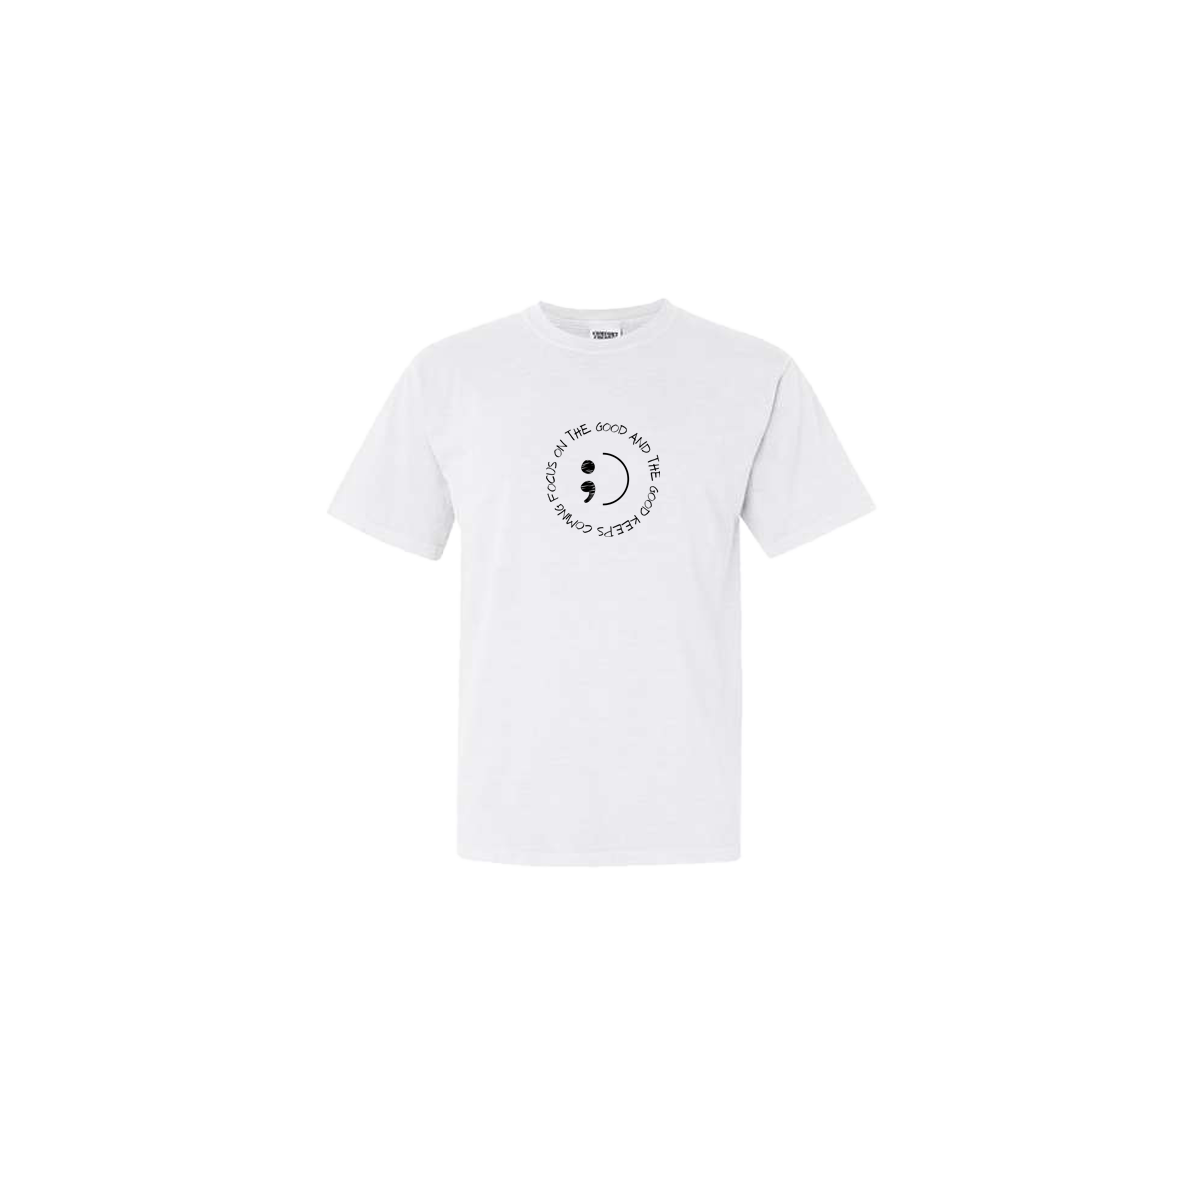 Focus on The Good And The Good Keeps Coming Embroidered White Tshirt - Mental Health Awareness Clothing